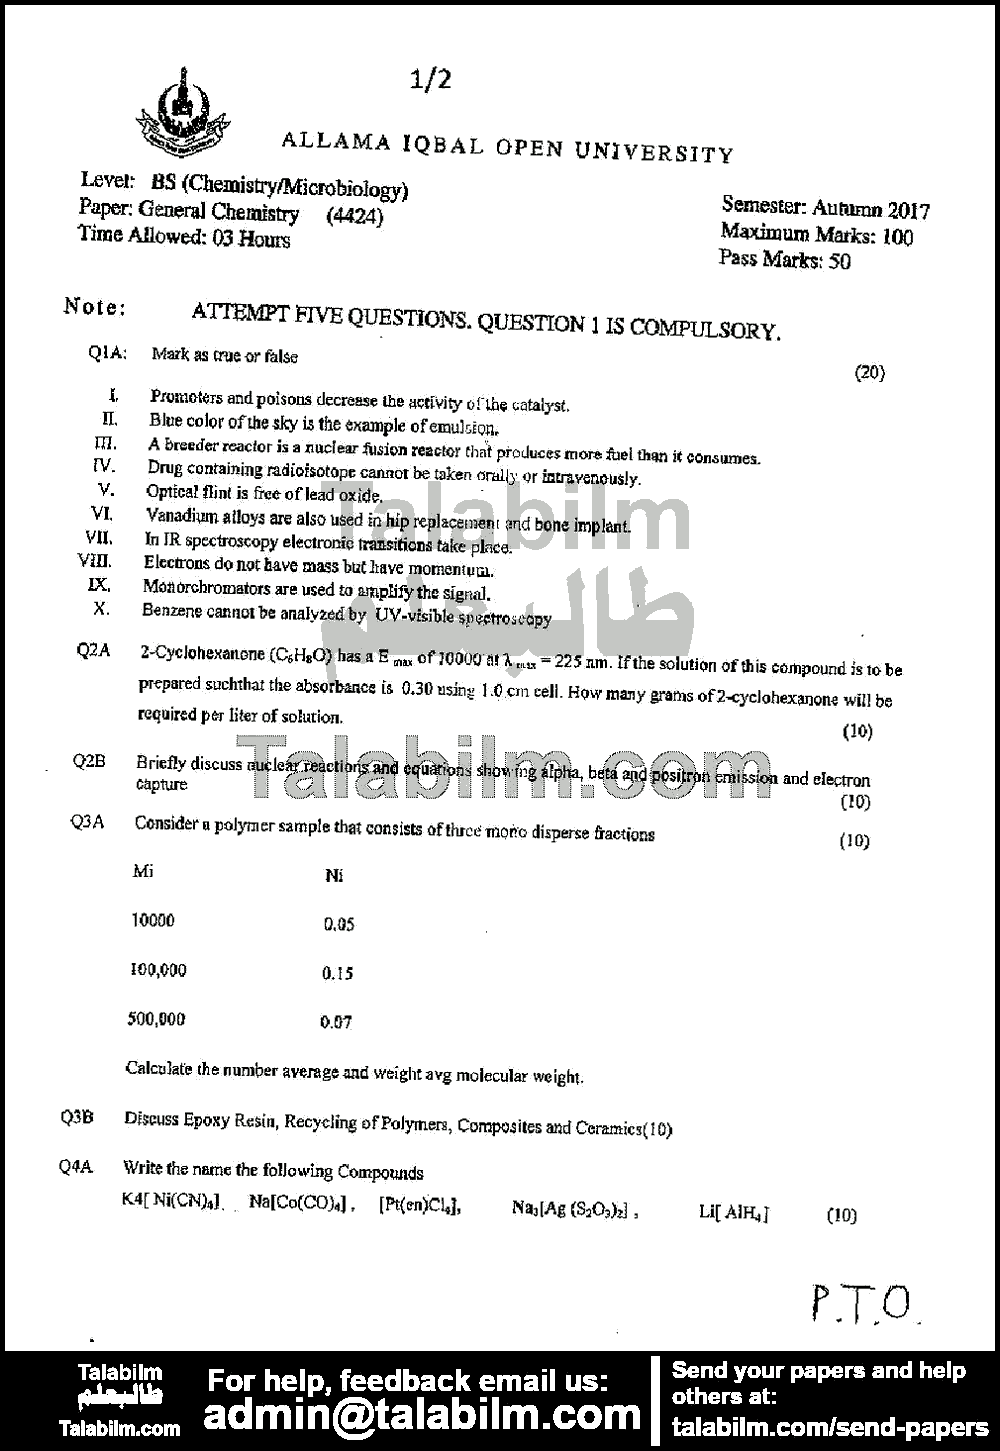 General Chemistry 4424 past paper for Autumn 2017